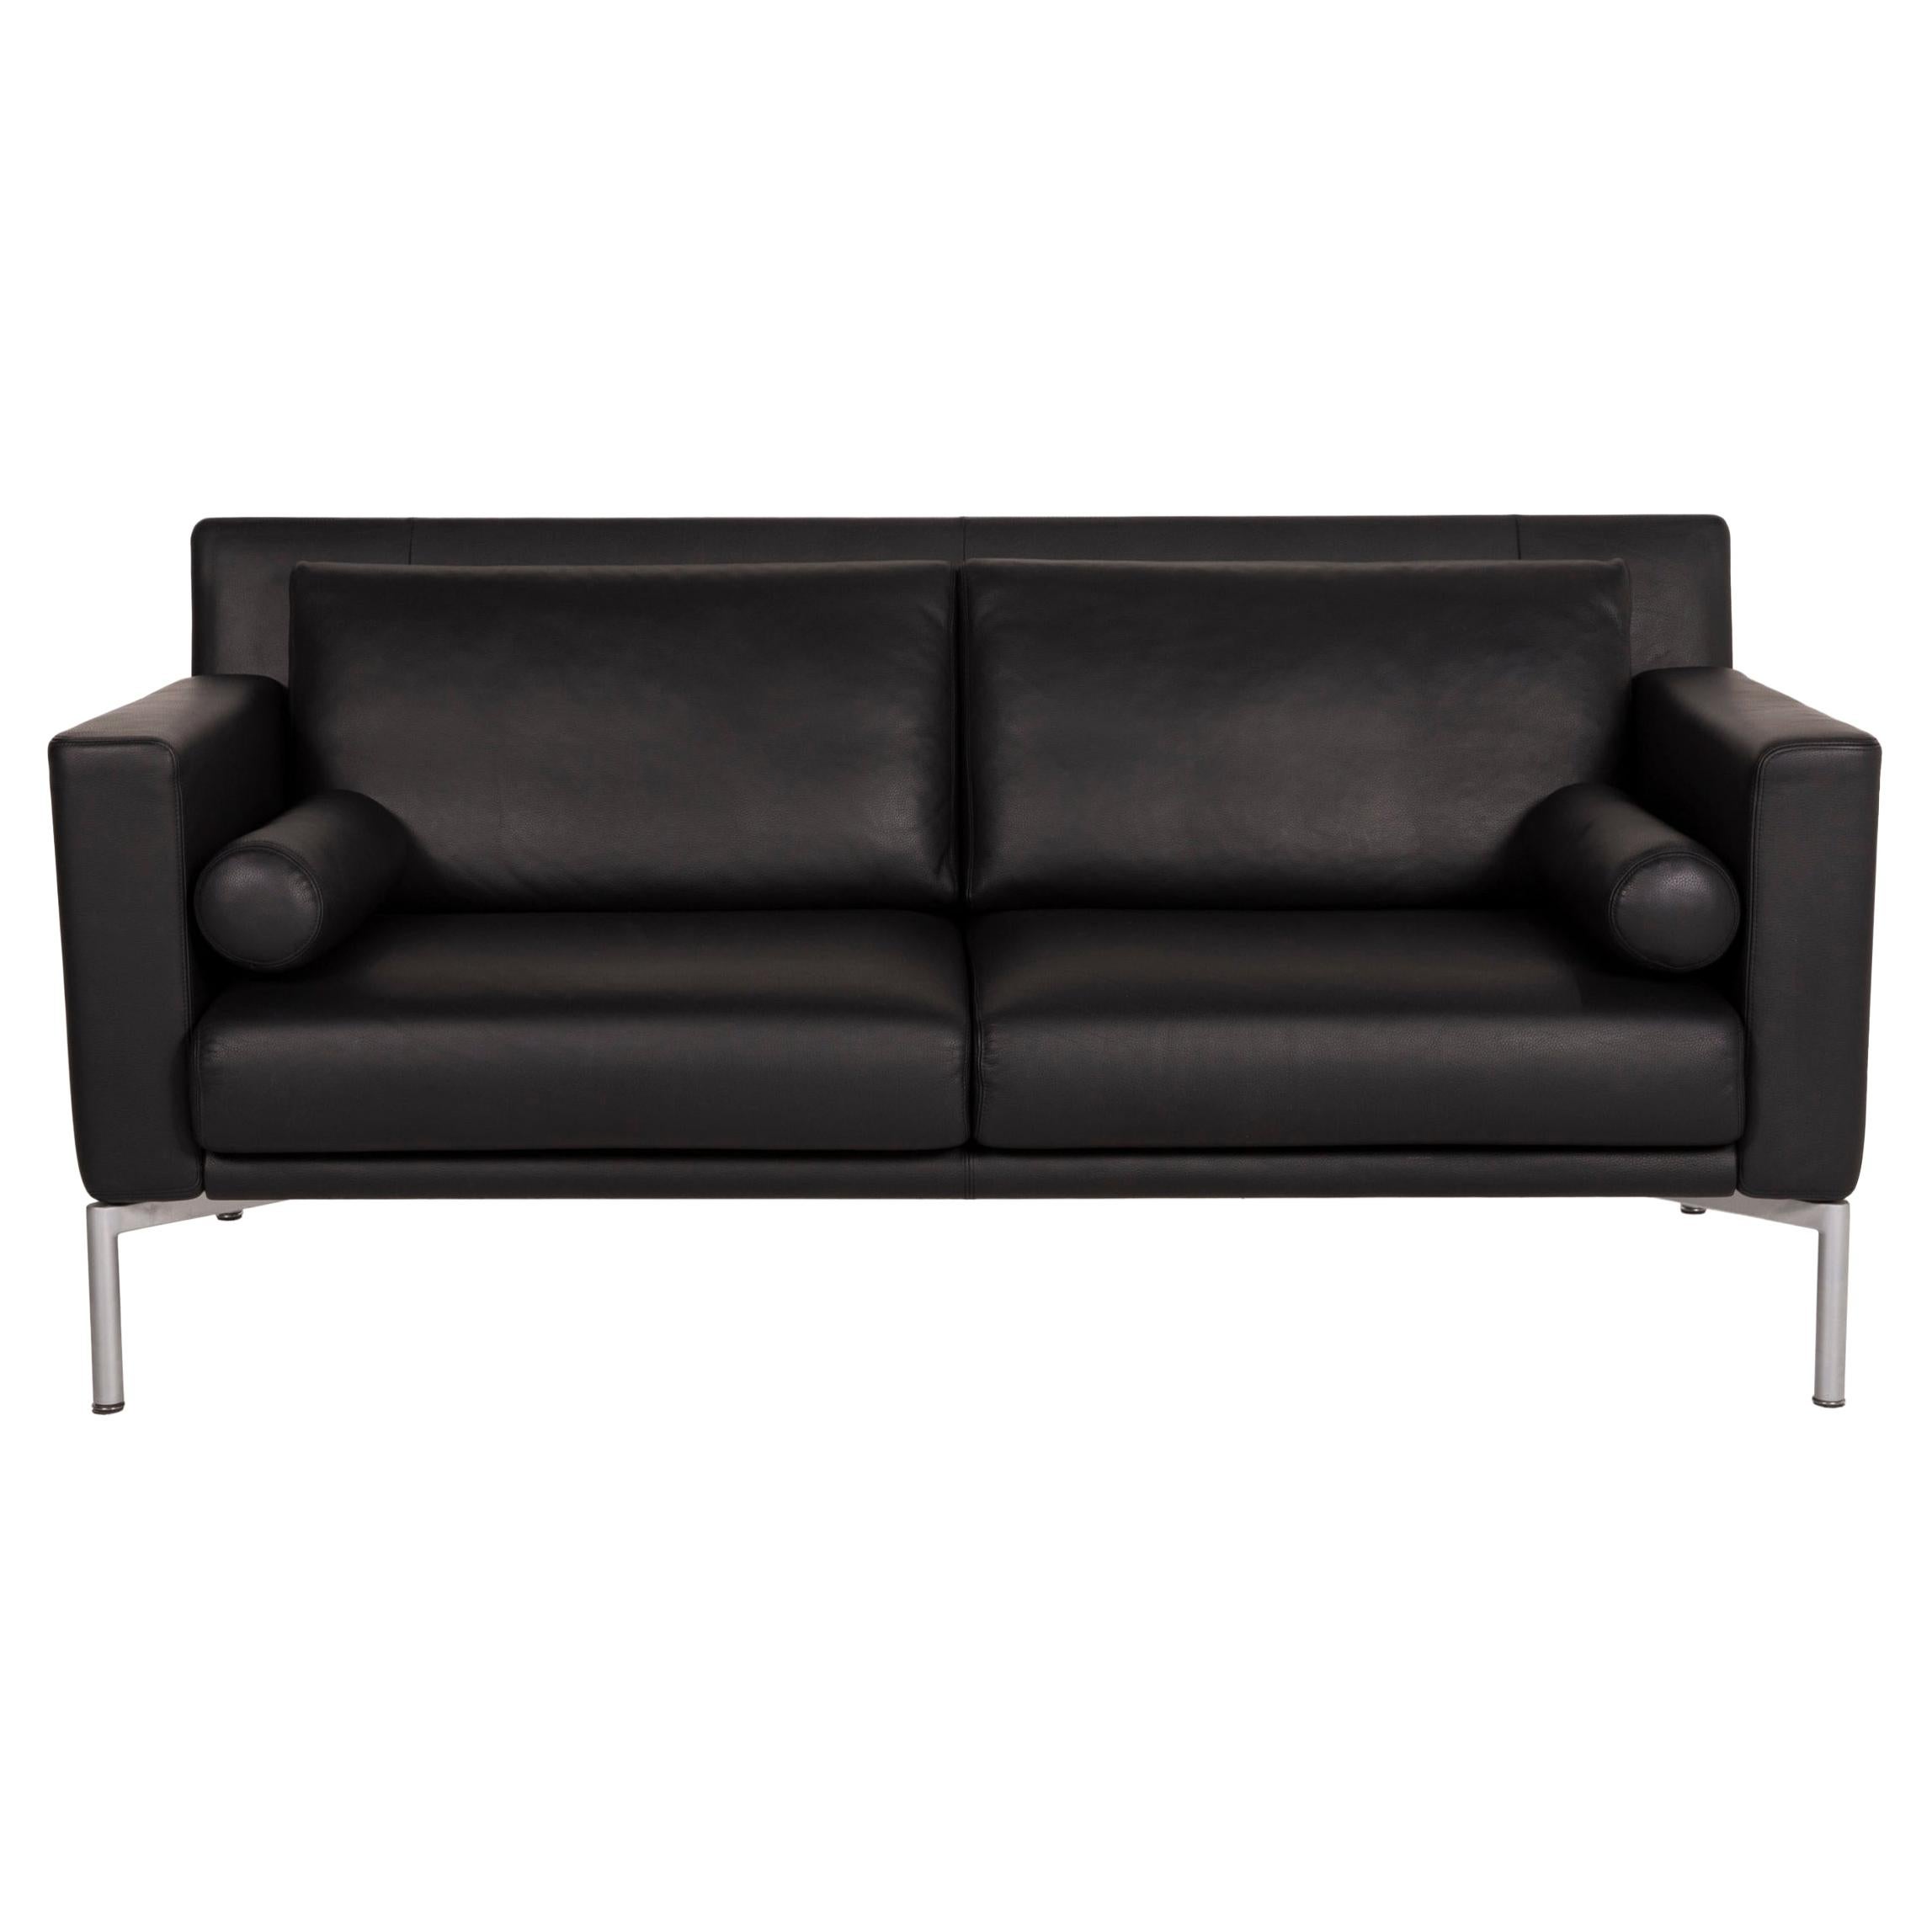 Walter Knoll Jason 390 Leather Sofa Black Two-Seater